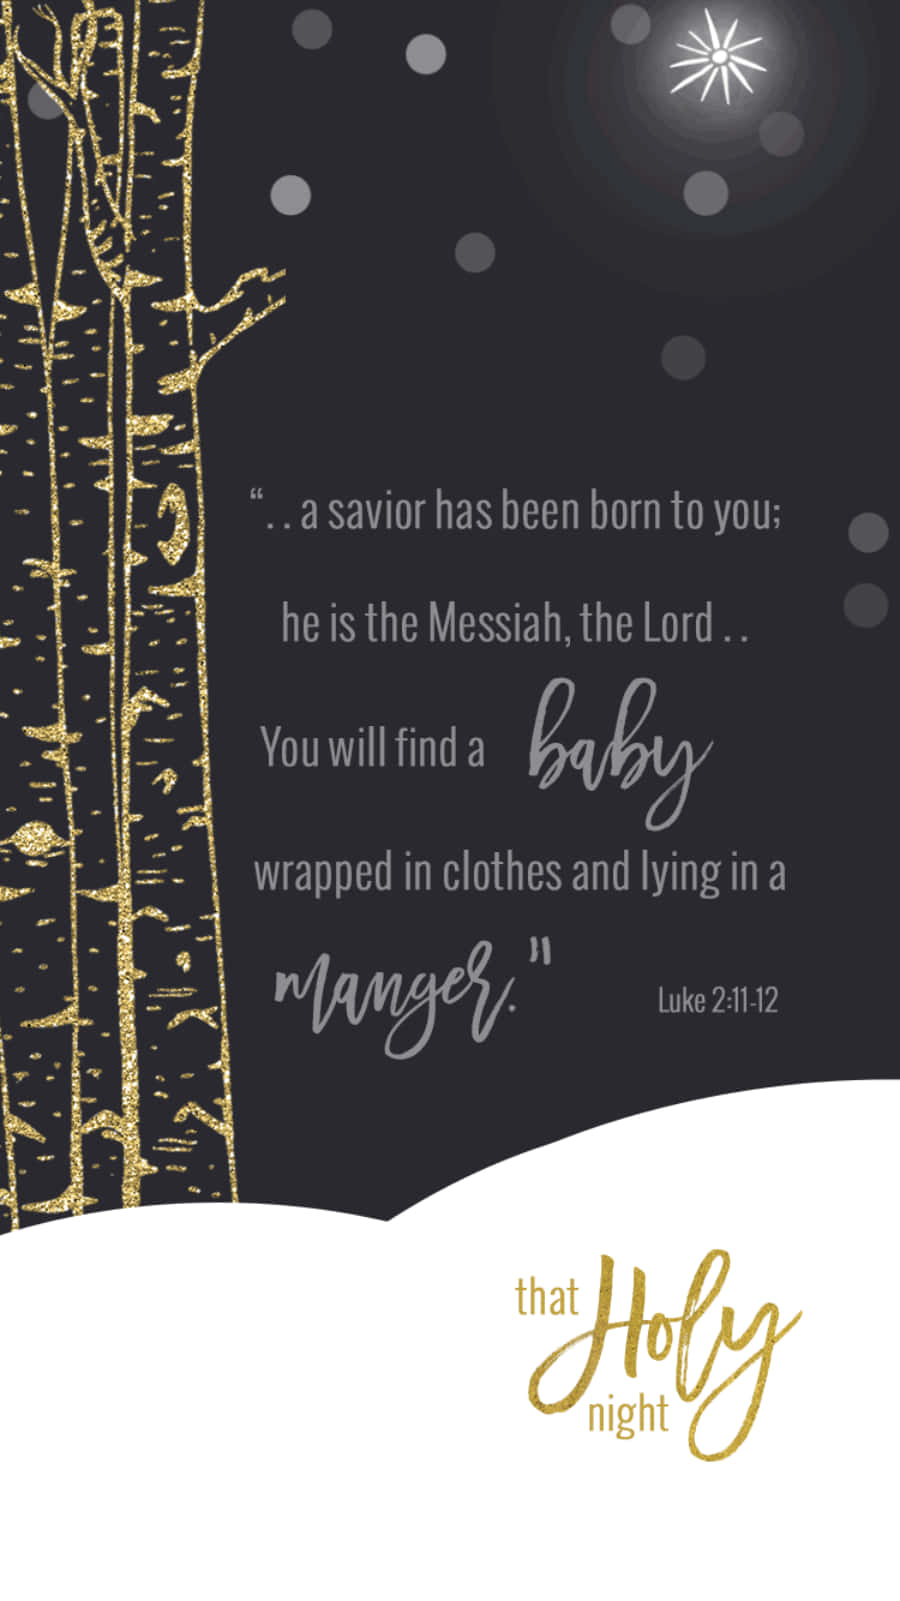 The Savior Has Been Born To You, The Messiah, The Baby, The Holy Night Wallpaper